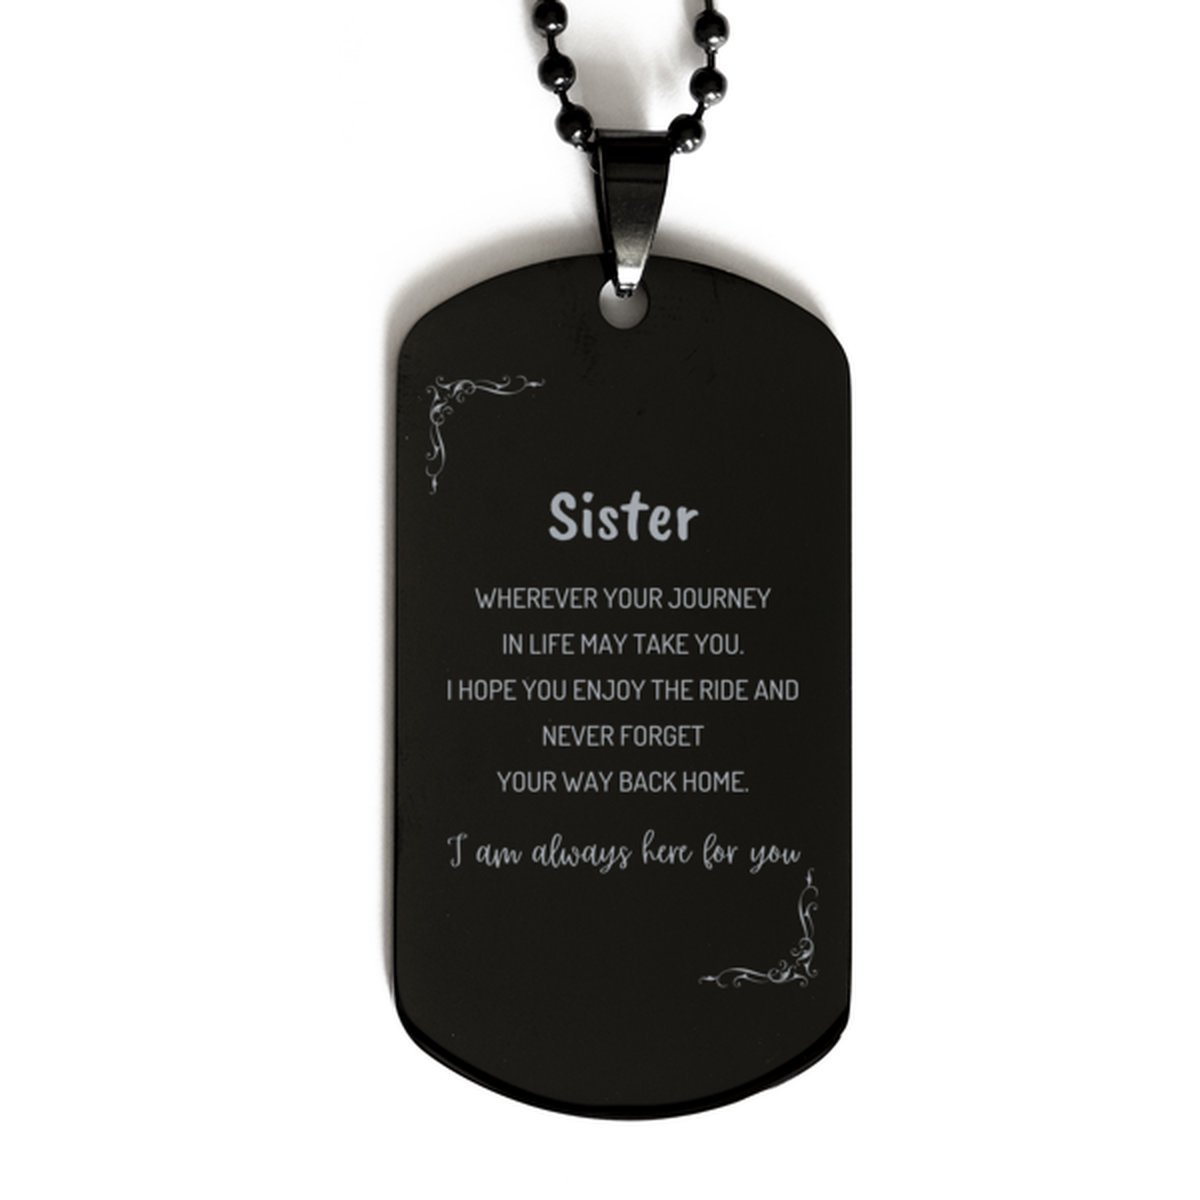 Sister wherever your journey in life may take you, I am always here for you Sister Black Dog Tag, Awesome Christmas Gifts For Sister, Sister Birthday Gifts for Men Women Family Loved One